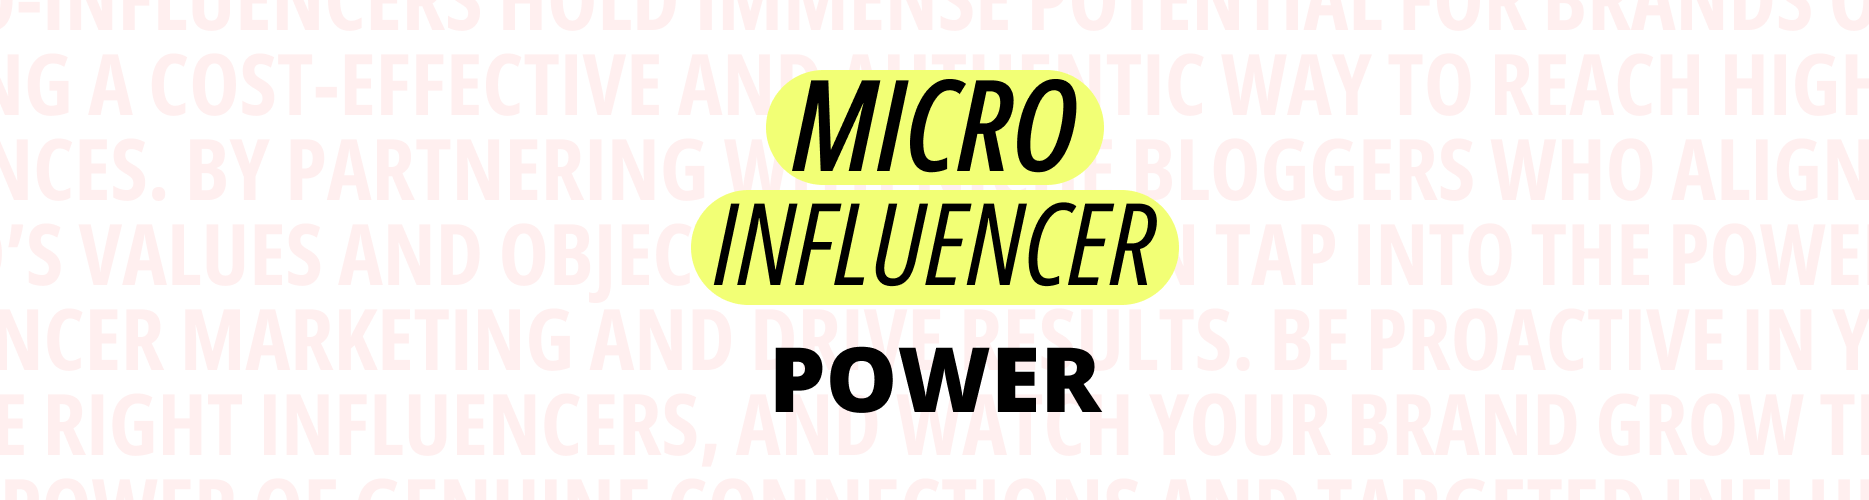 Micro-Influencer Power: Unleashing the Potential for Both Small and Large Brands